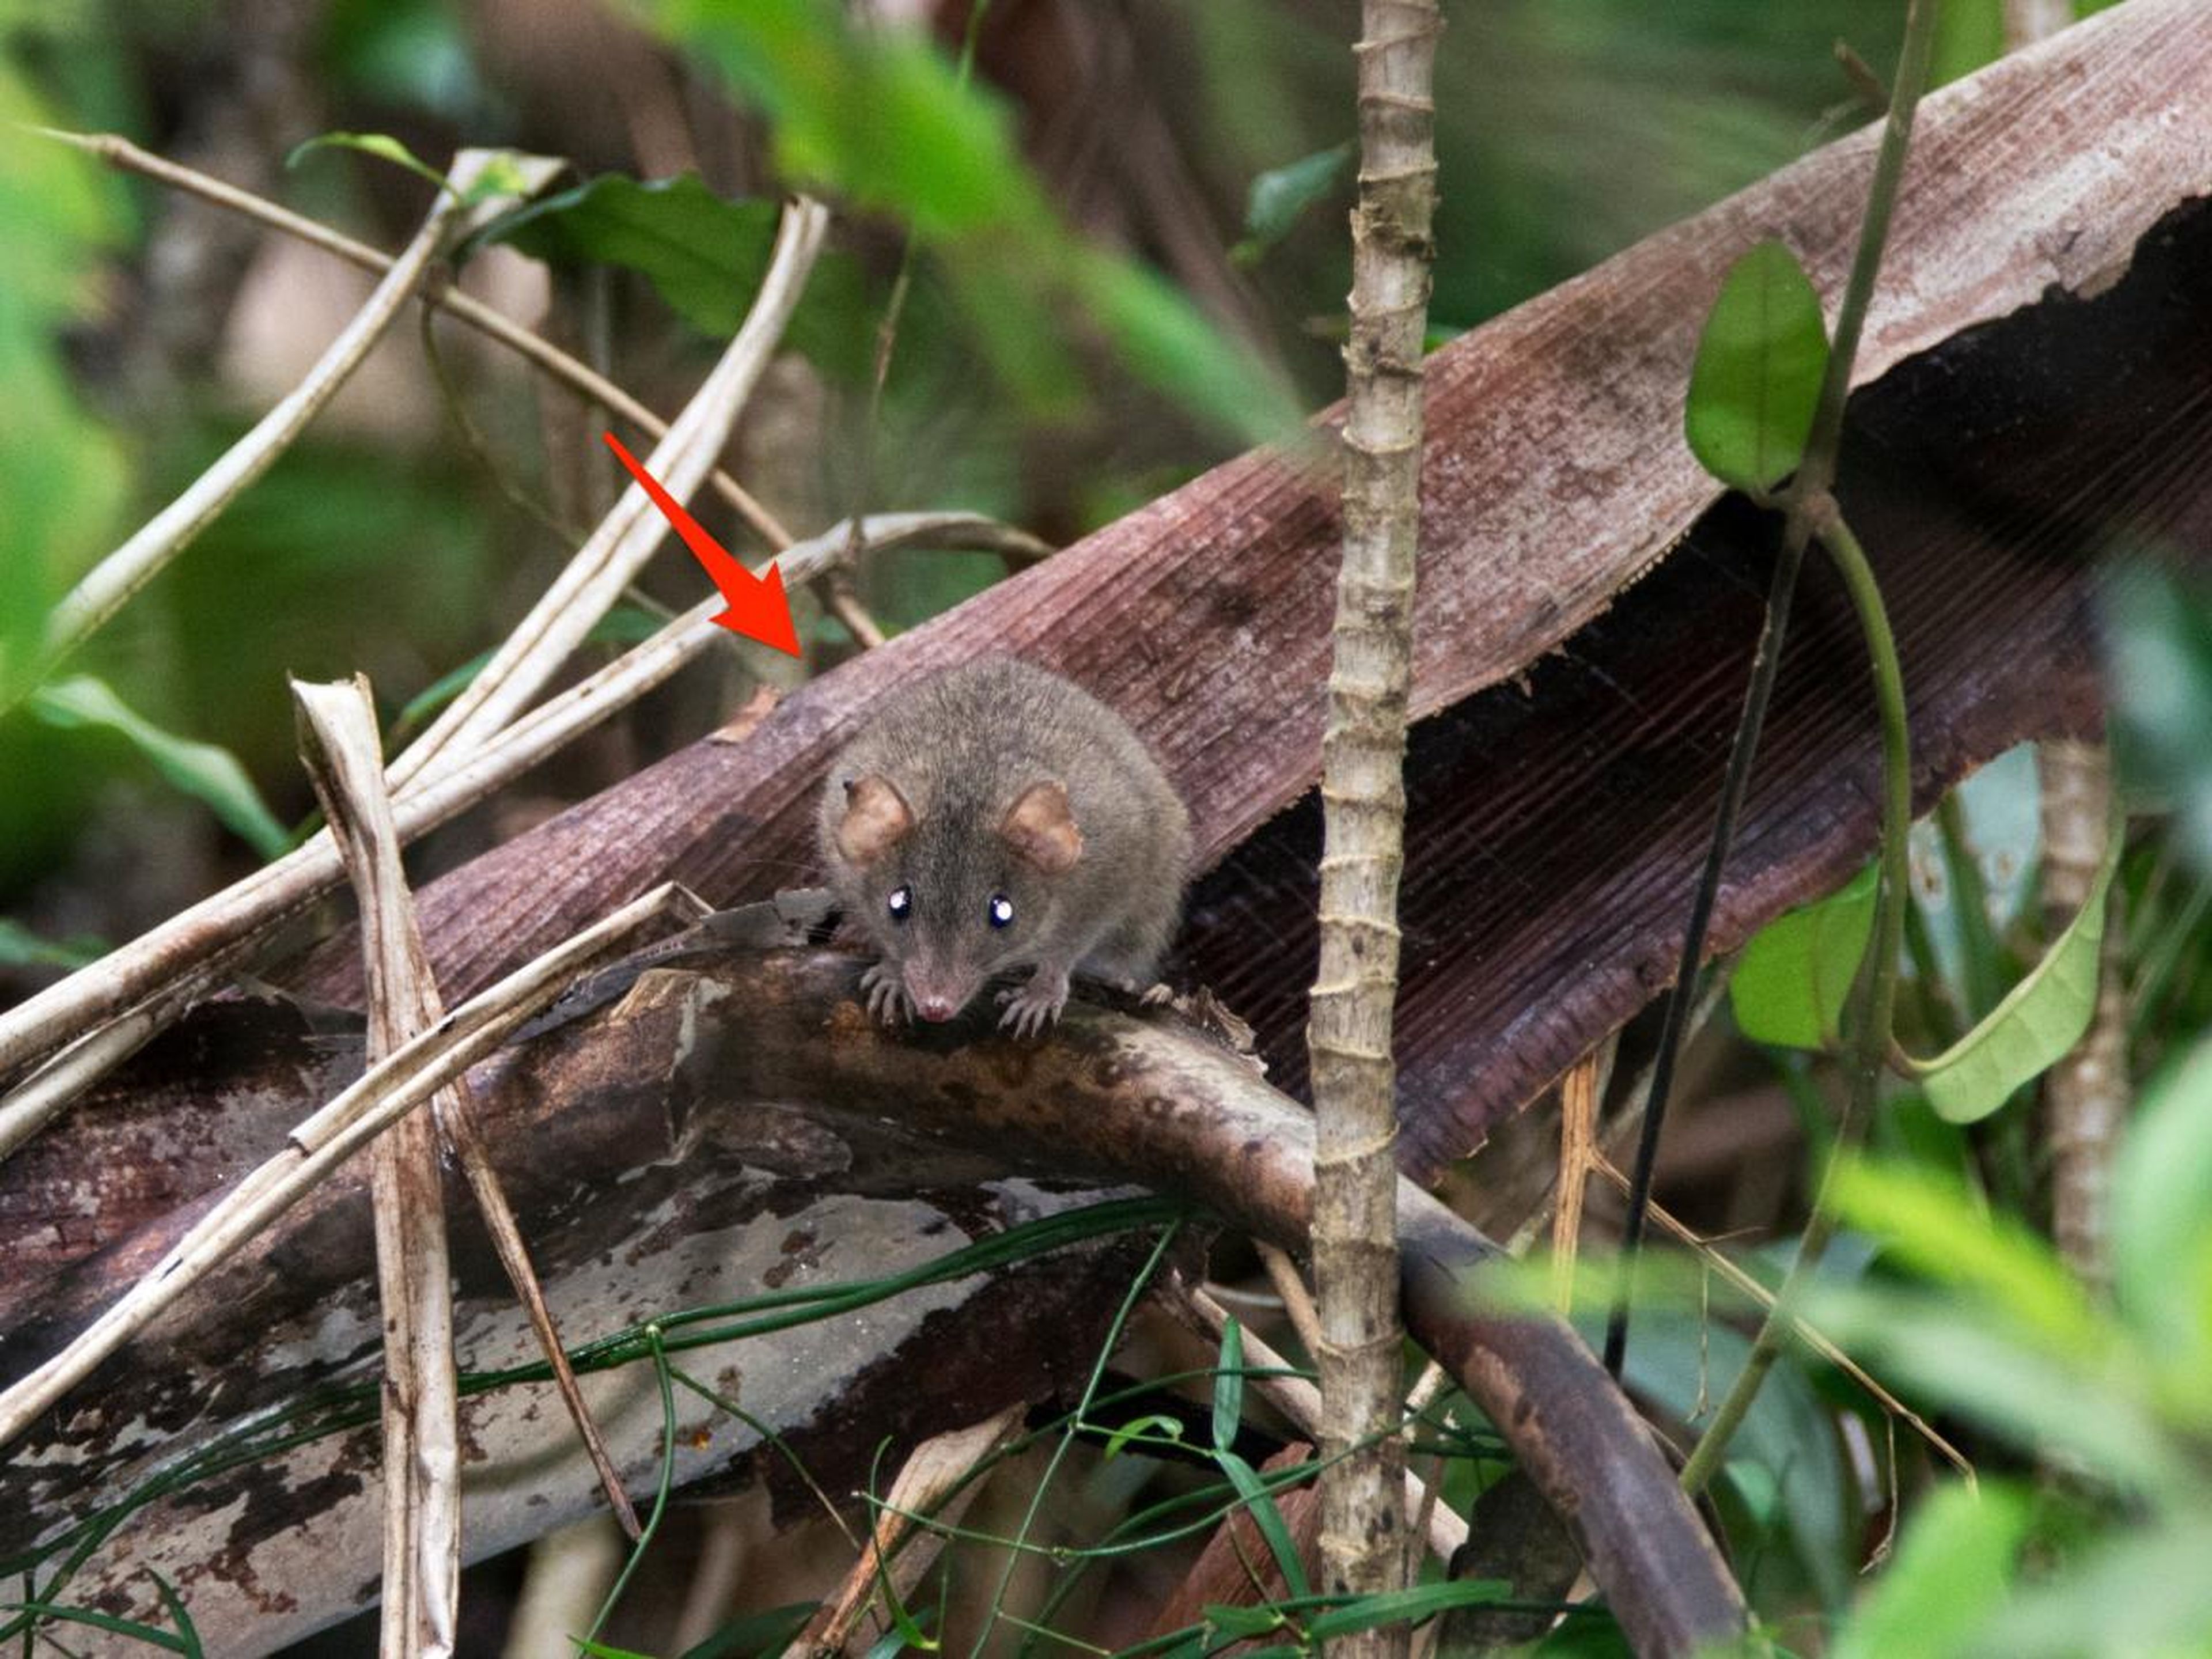 The Bramble Cay melomys is the first species to go extinct because of human-driven climate change.